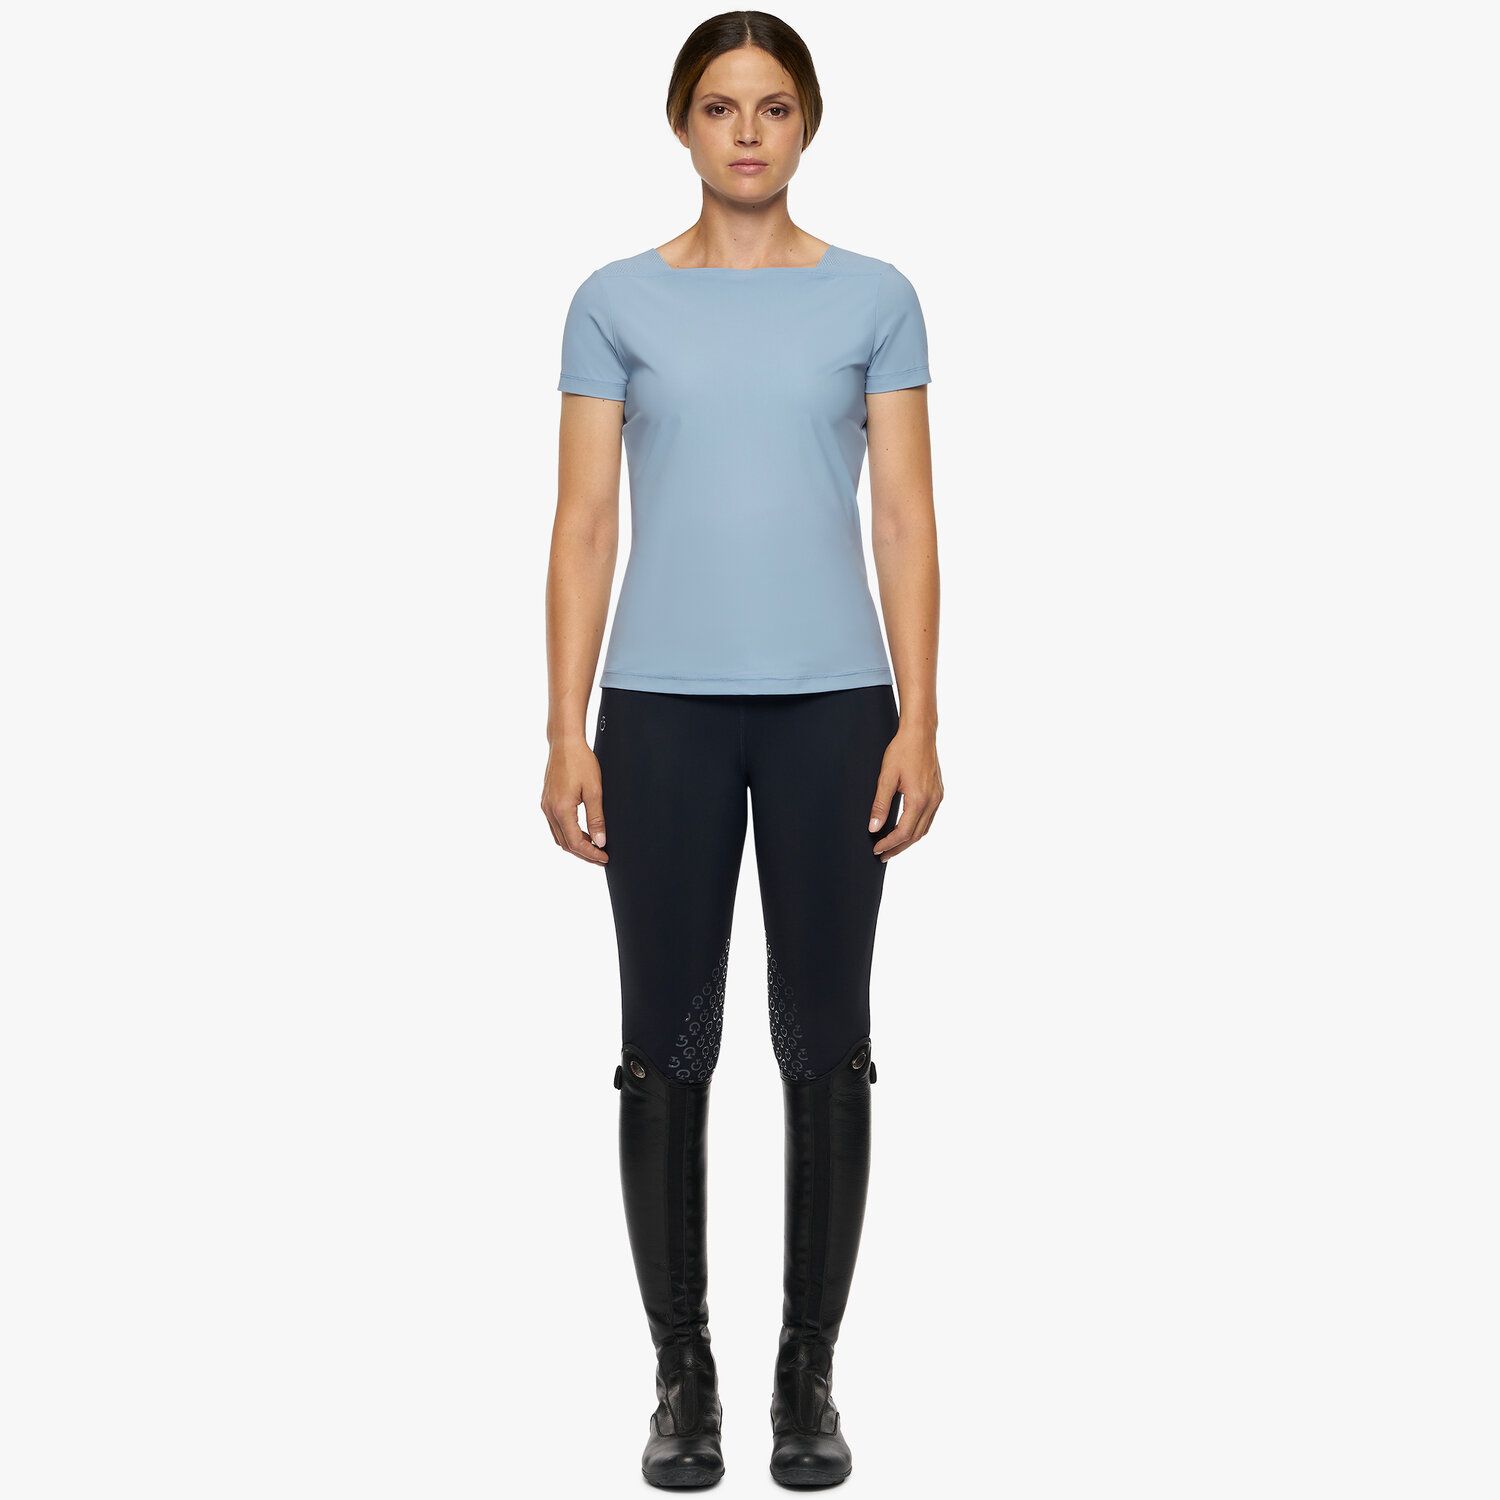 Cavalleria Toscana Women’s jersey t-shirt with perforated details Light blue-1